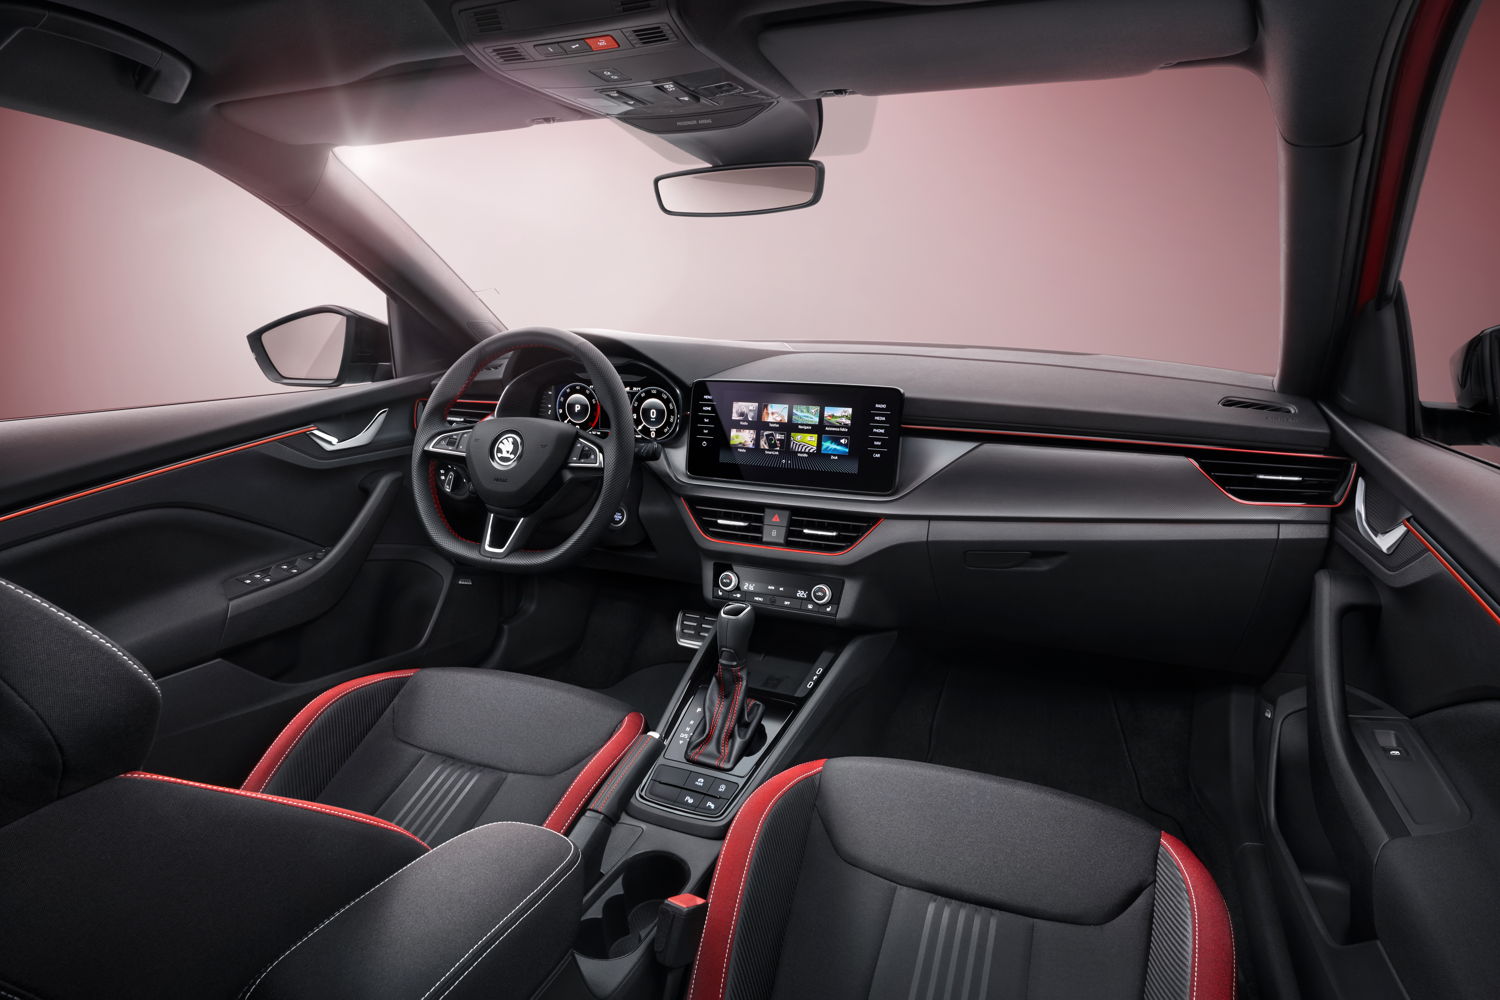 The interior design of the ŠKODA SCALA MONTE CARLO radiates sporting appeal. Height-adjustable sports seats with integrated headrests are complemented by a multifunction sports steering wheel. Red decorative seams and red LED ambient lighting add sporting touches. Other visual details such as pedal trim with an aluminium design round off the sporty ambience in the interior.